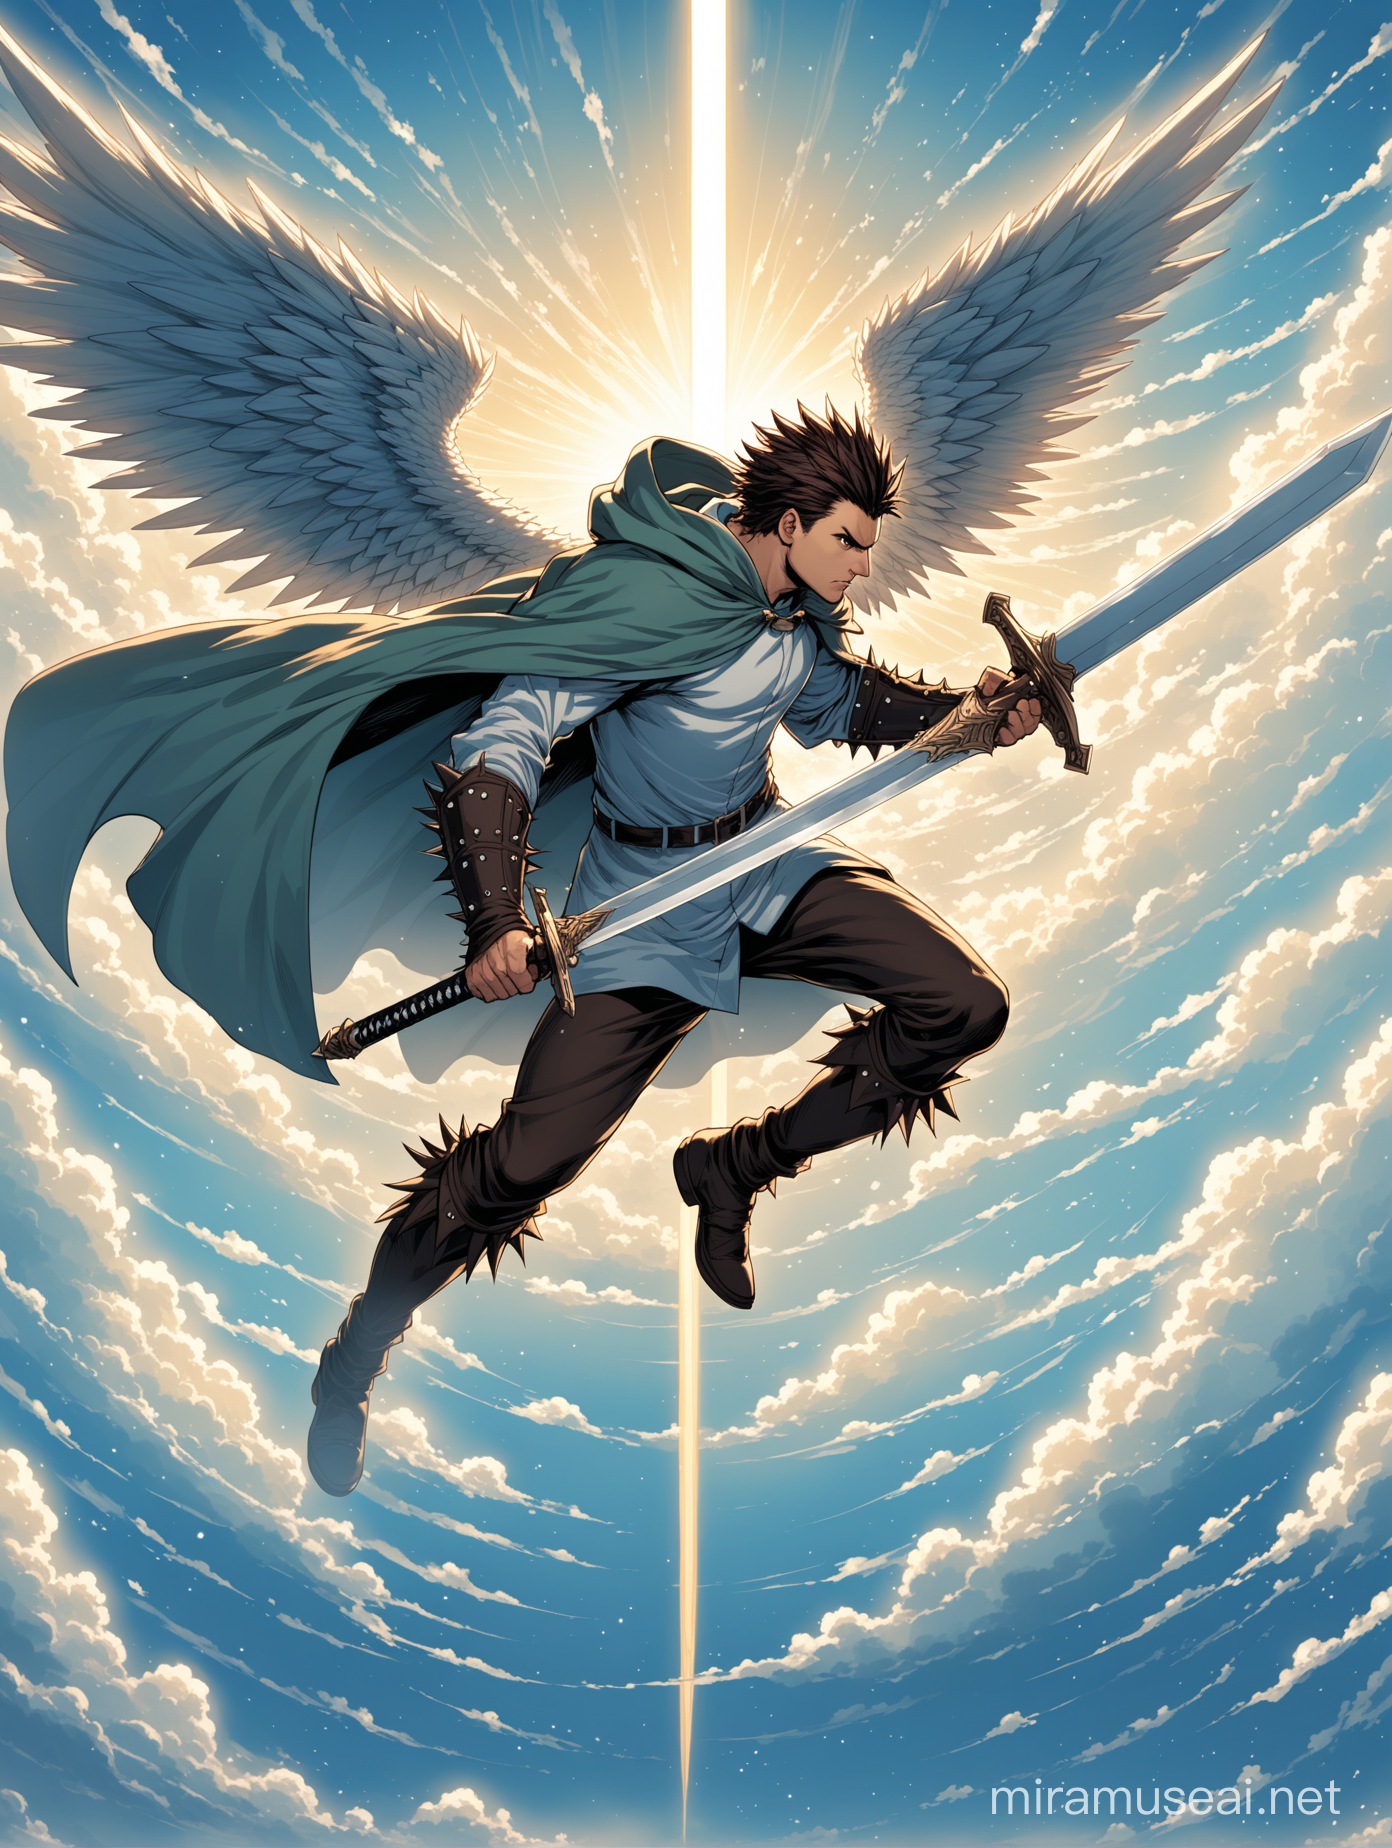 Angelic Warrior Dueling in the Sky with Sword and Wings